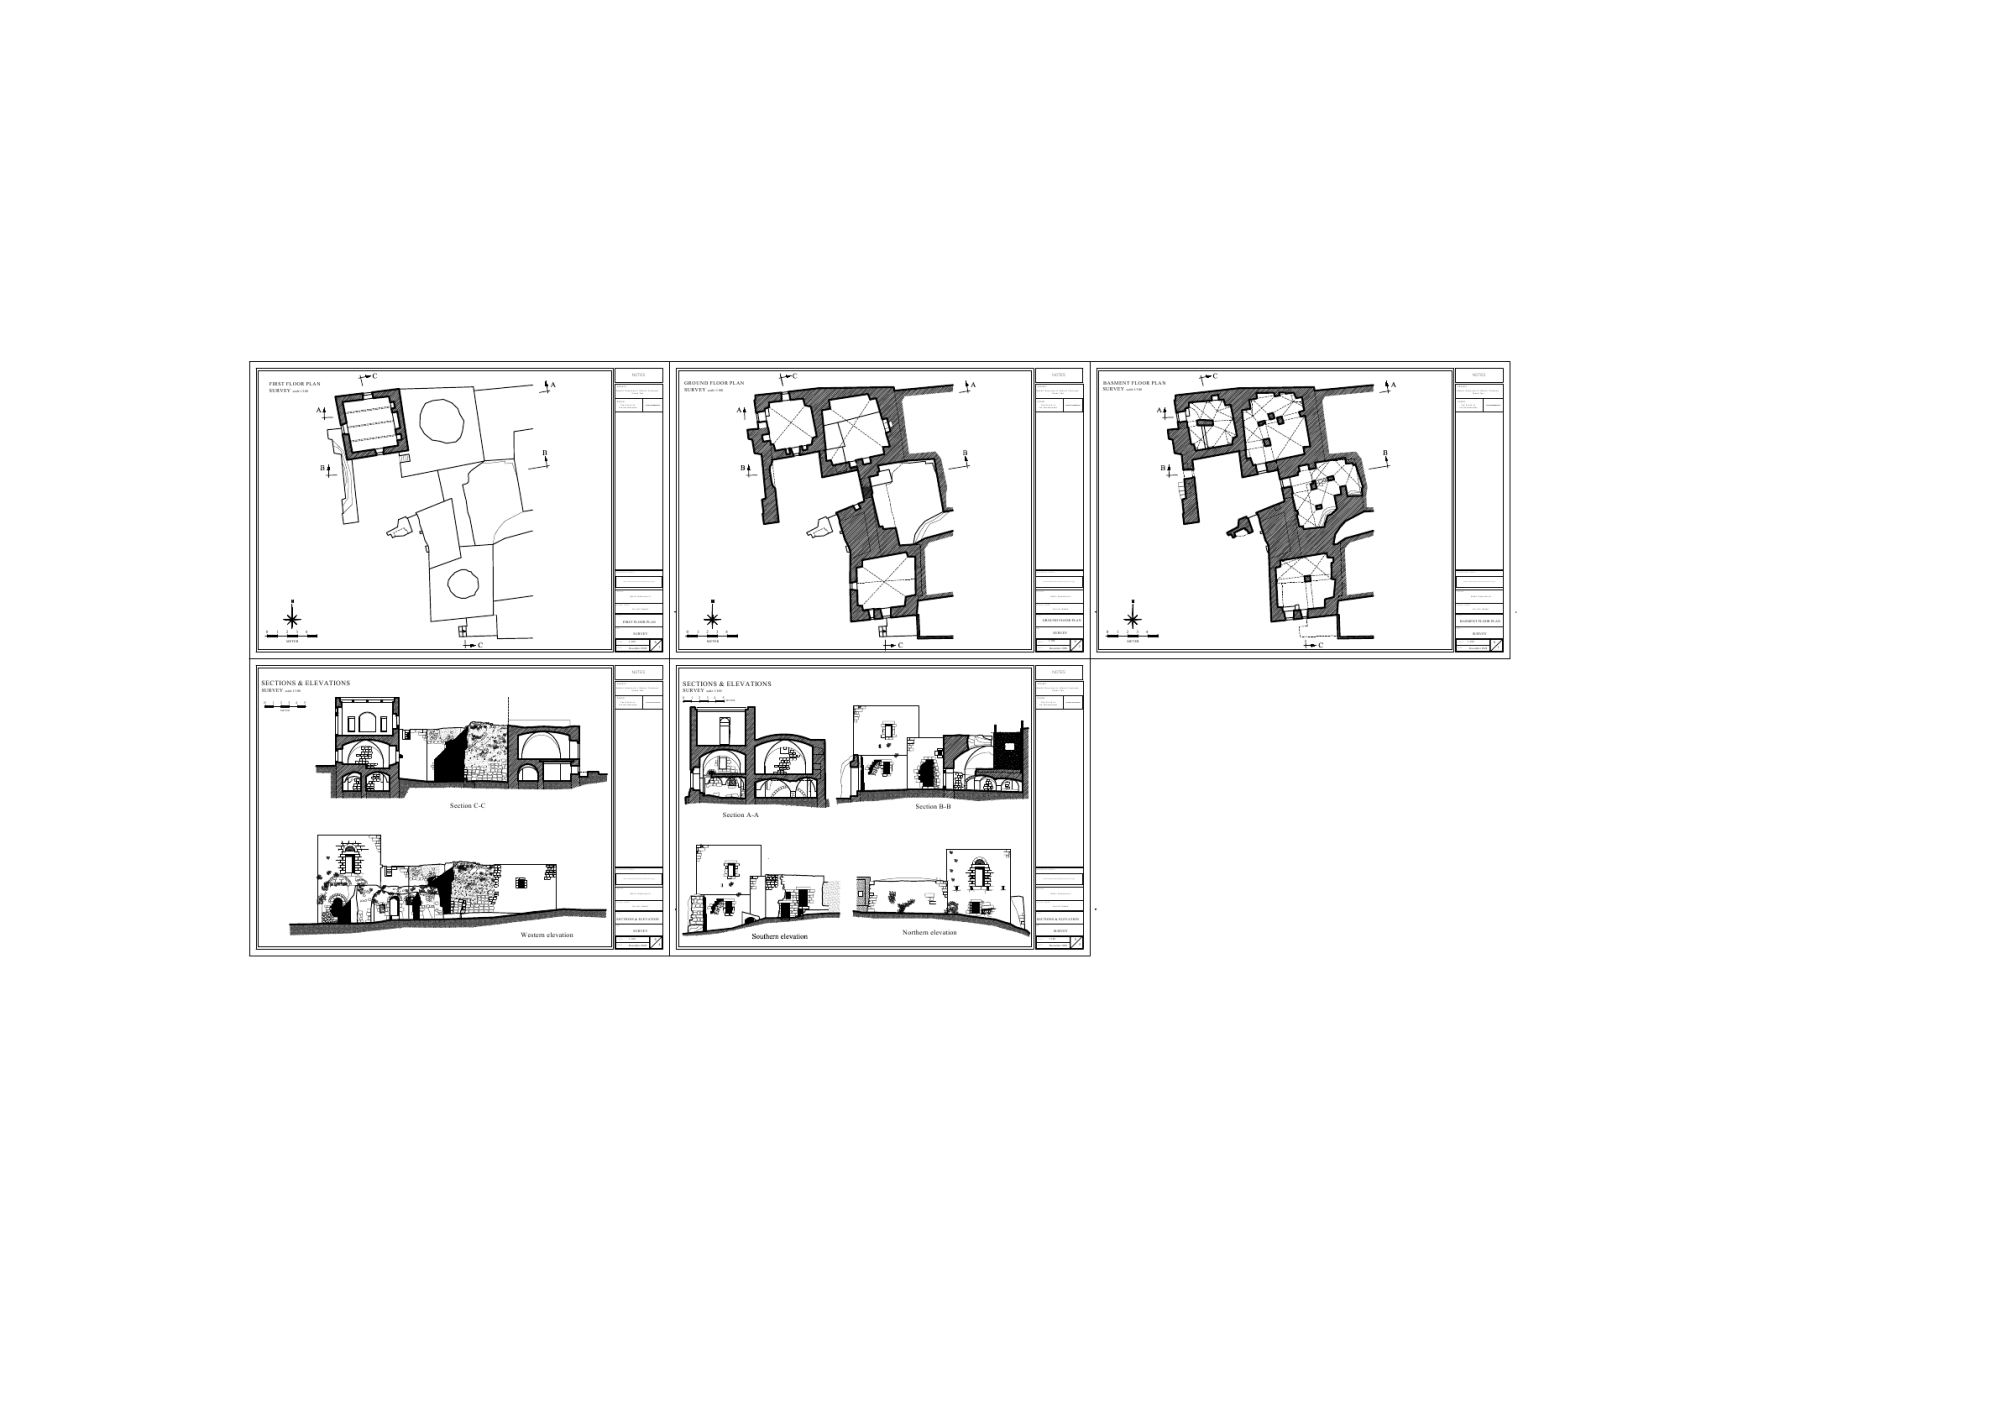 Compound Survey Drawings. CAD drawing converted to image file.